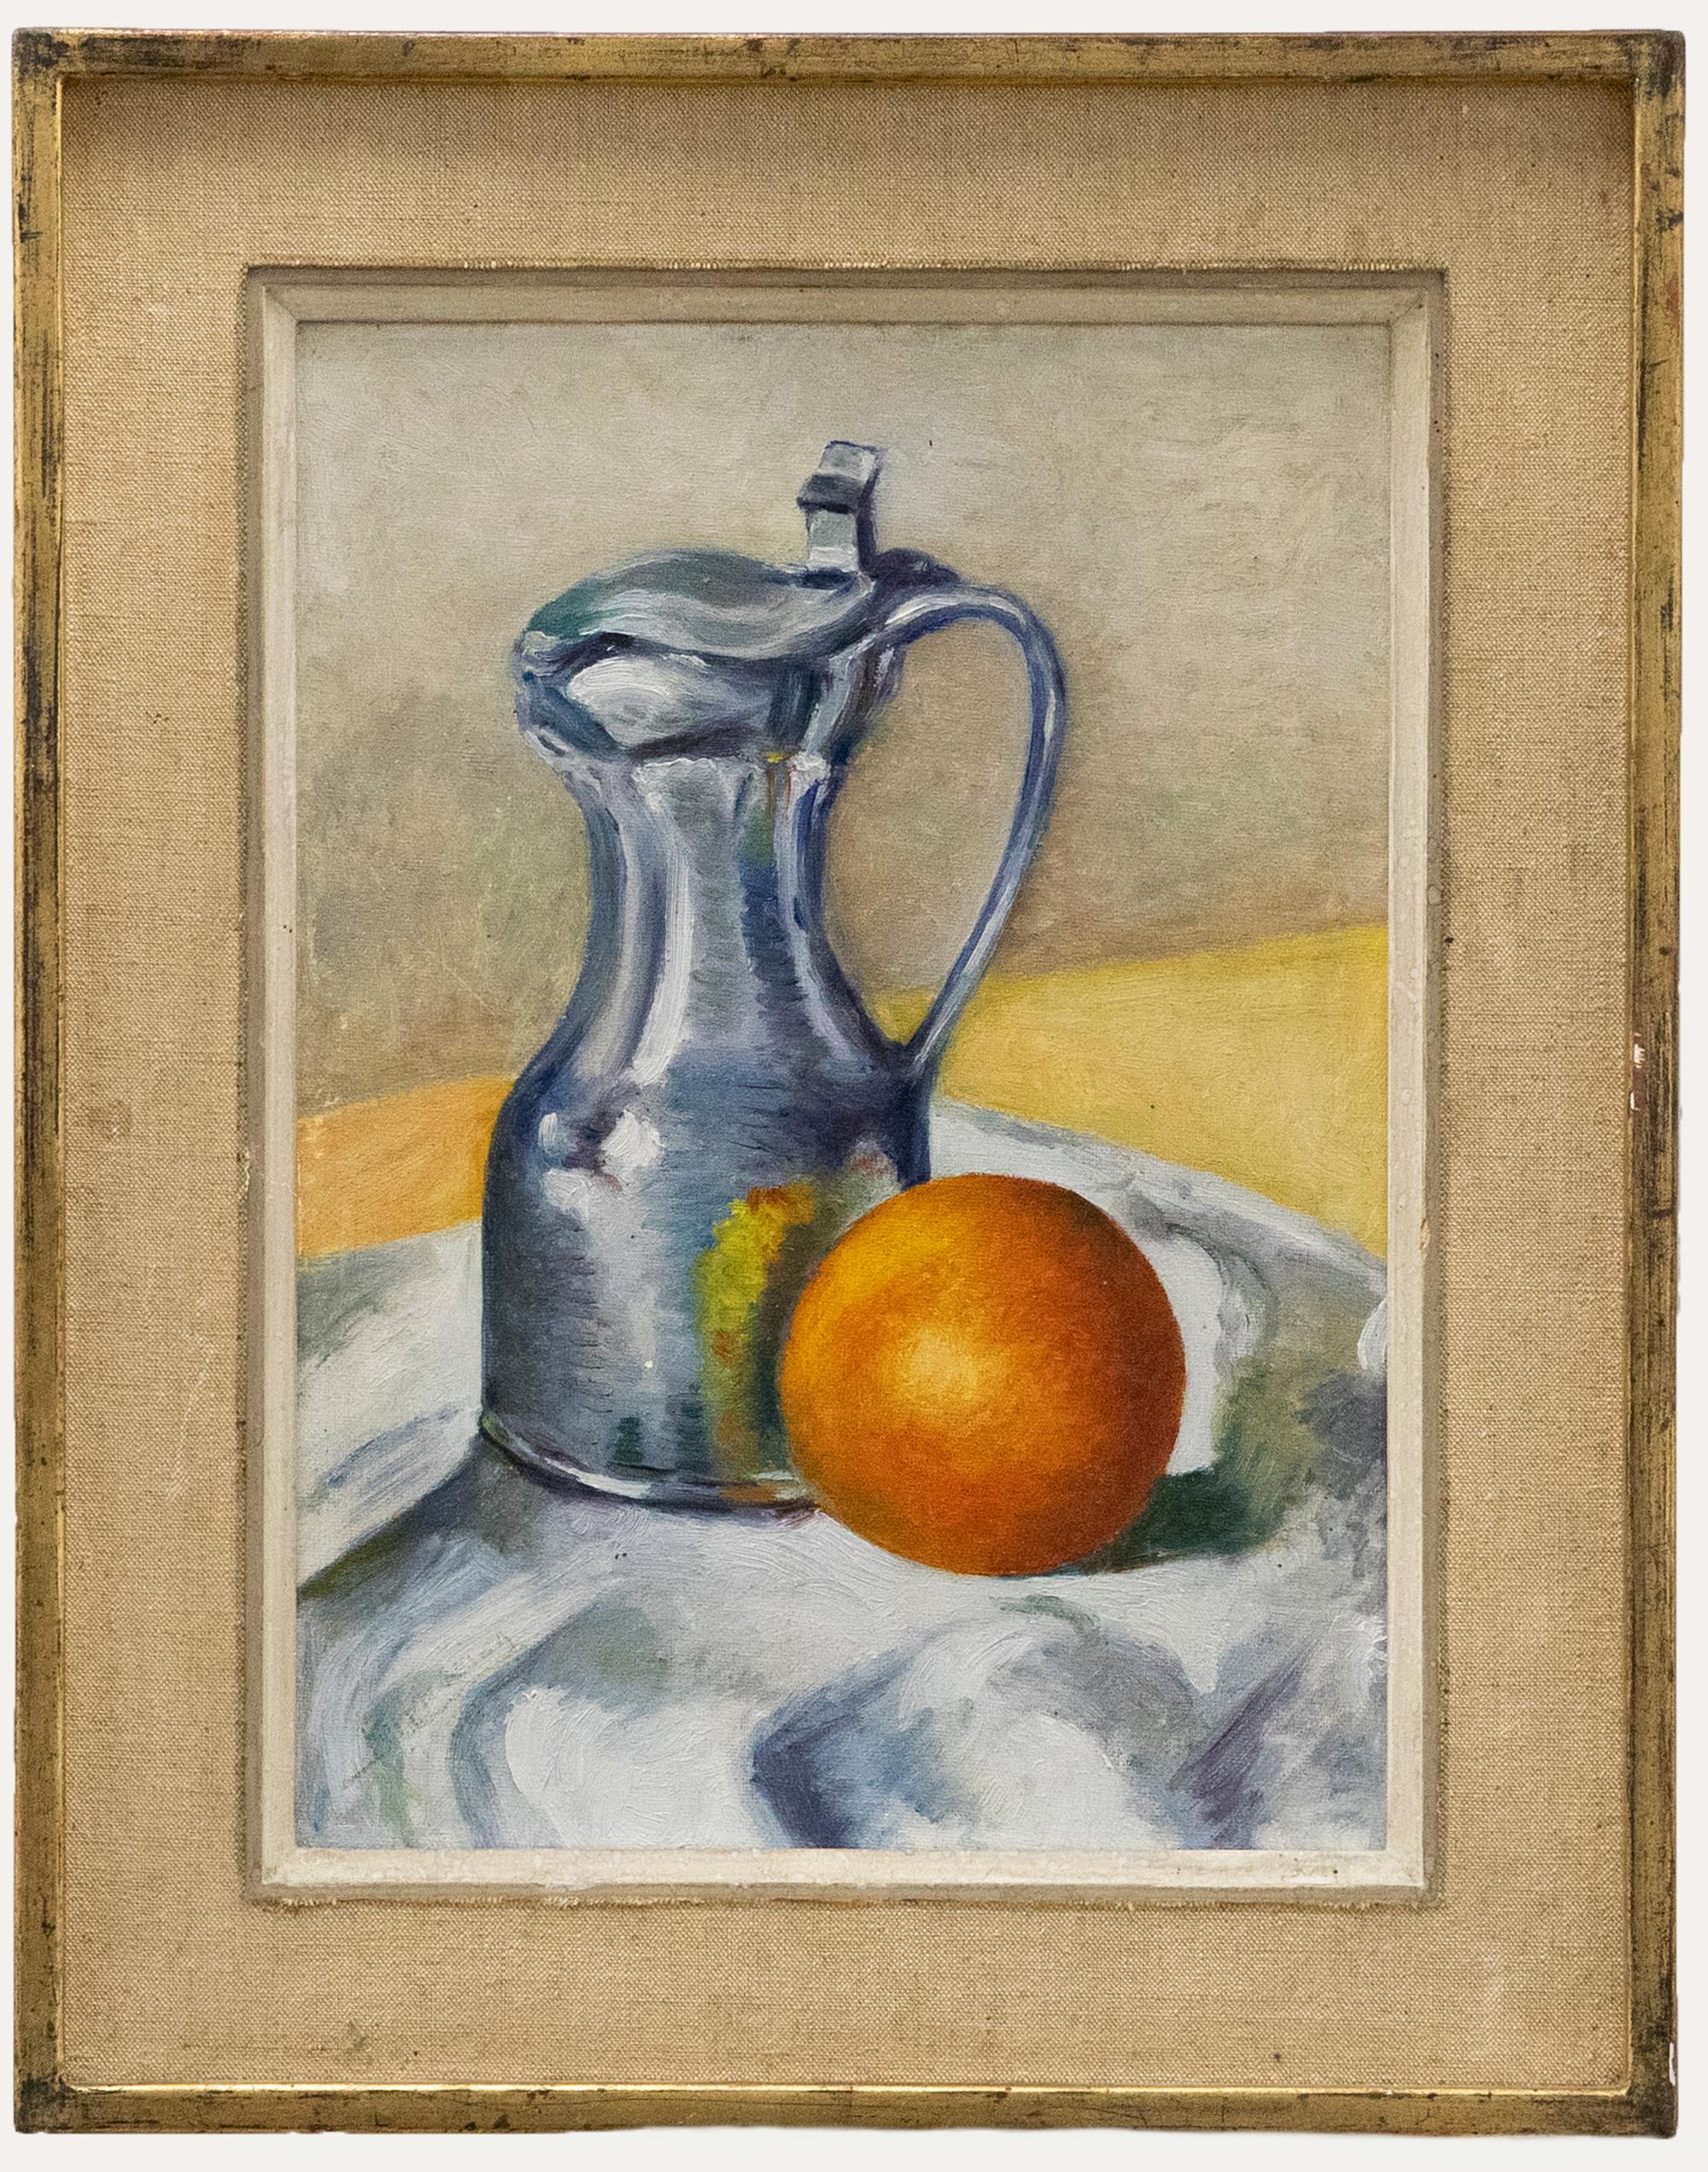 Unknown Still-Life Painting - M. Mania  - 20th Century Oil, Tangerine and Pewter Jug